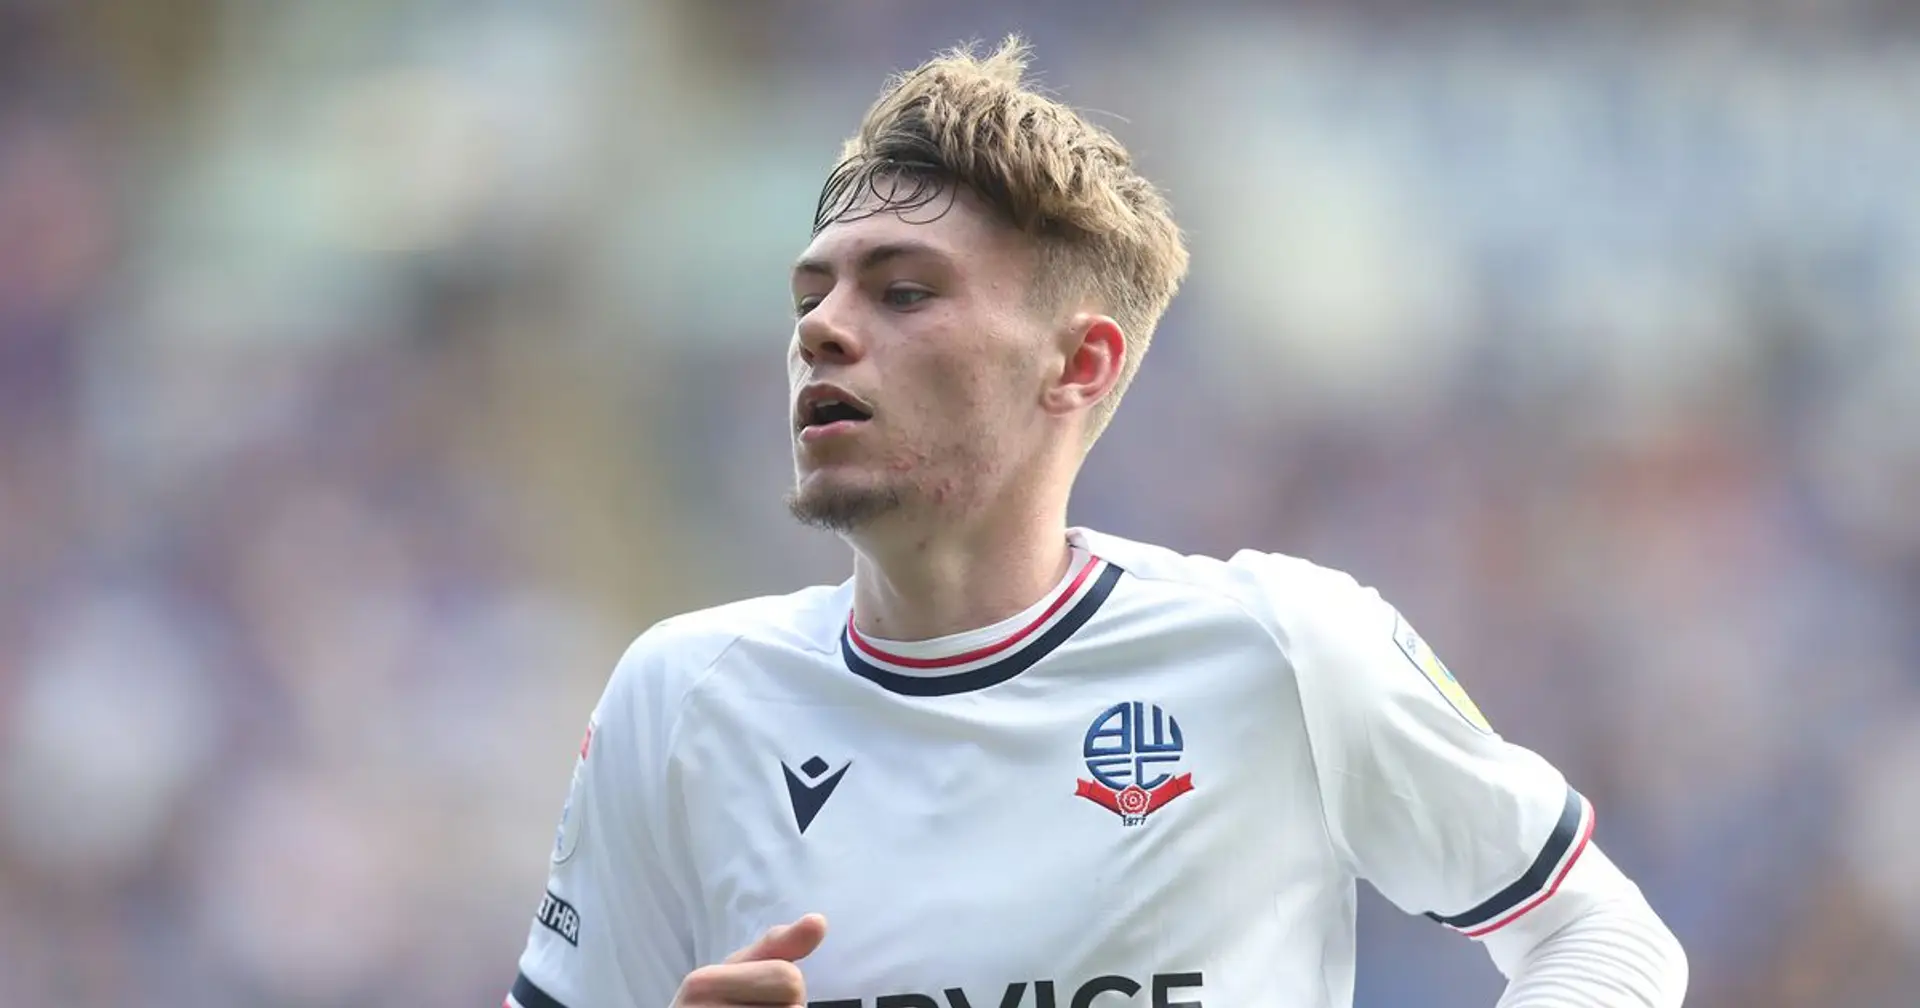 'Our best player at the moment': Bolton fan details LFC loanee Conor Bradley's season